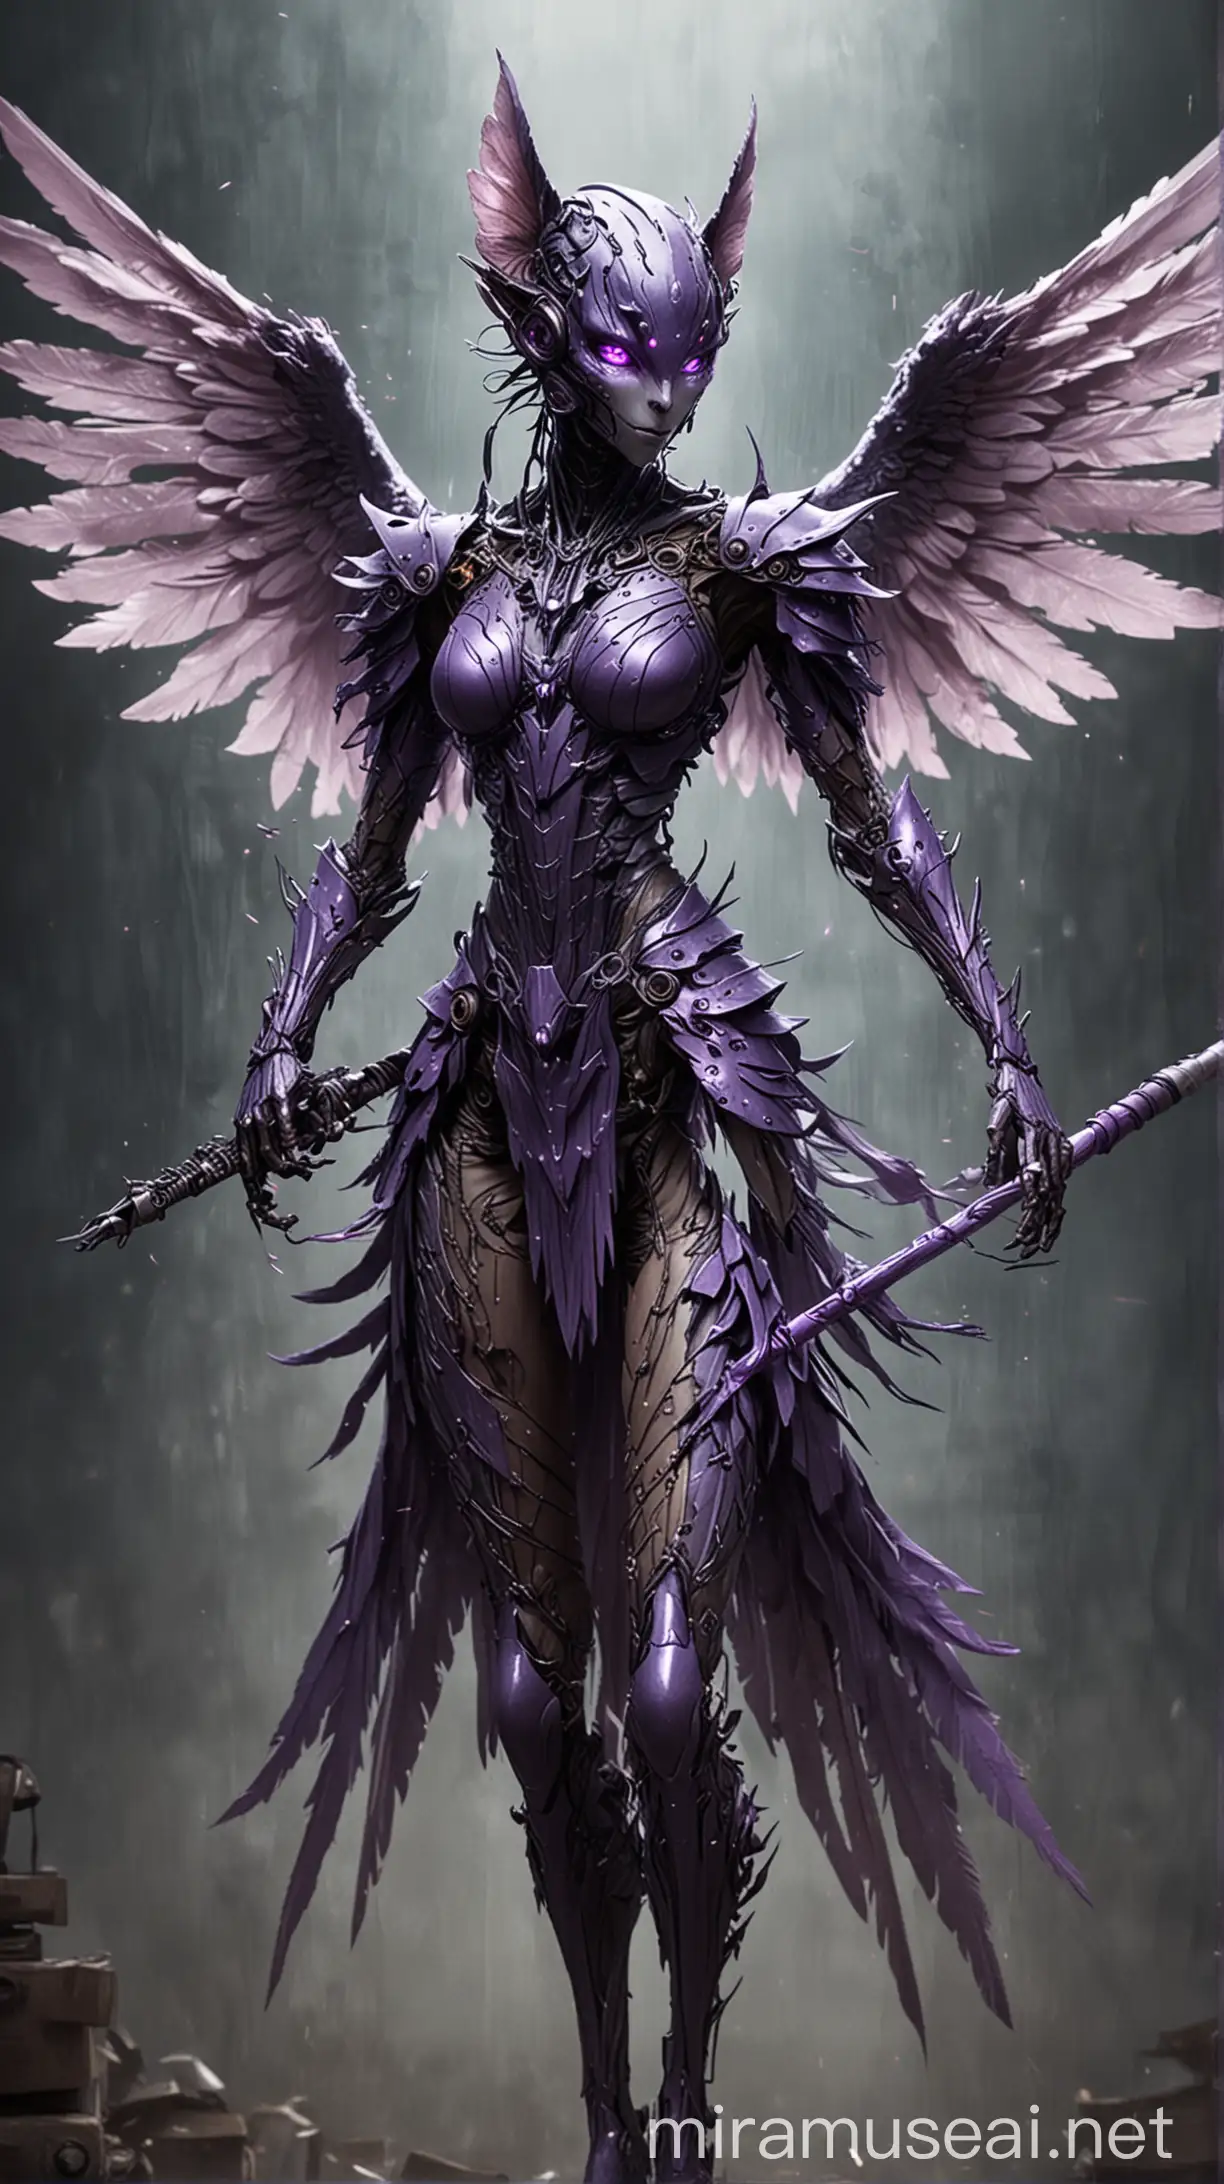 Name: Lyrafiend
Appearance: A winged, humanoid creature with a musical instrument-like body, glowing purple eyes, and razor-sharp claws. Create the images exactly like the description but make it terrifying.